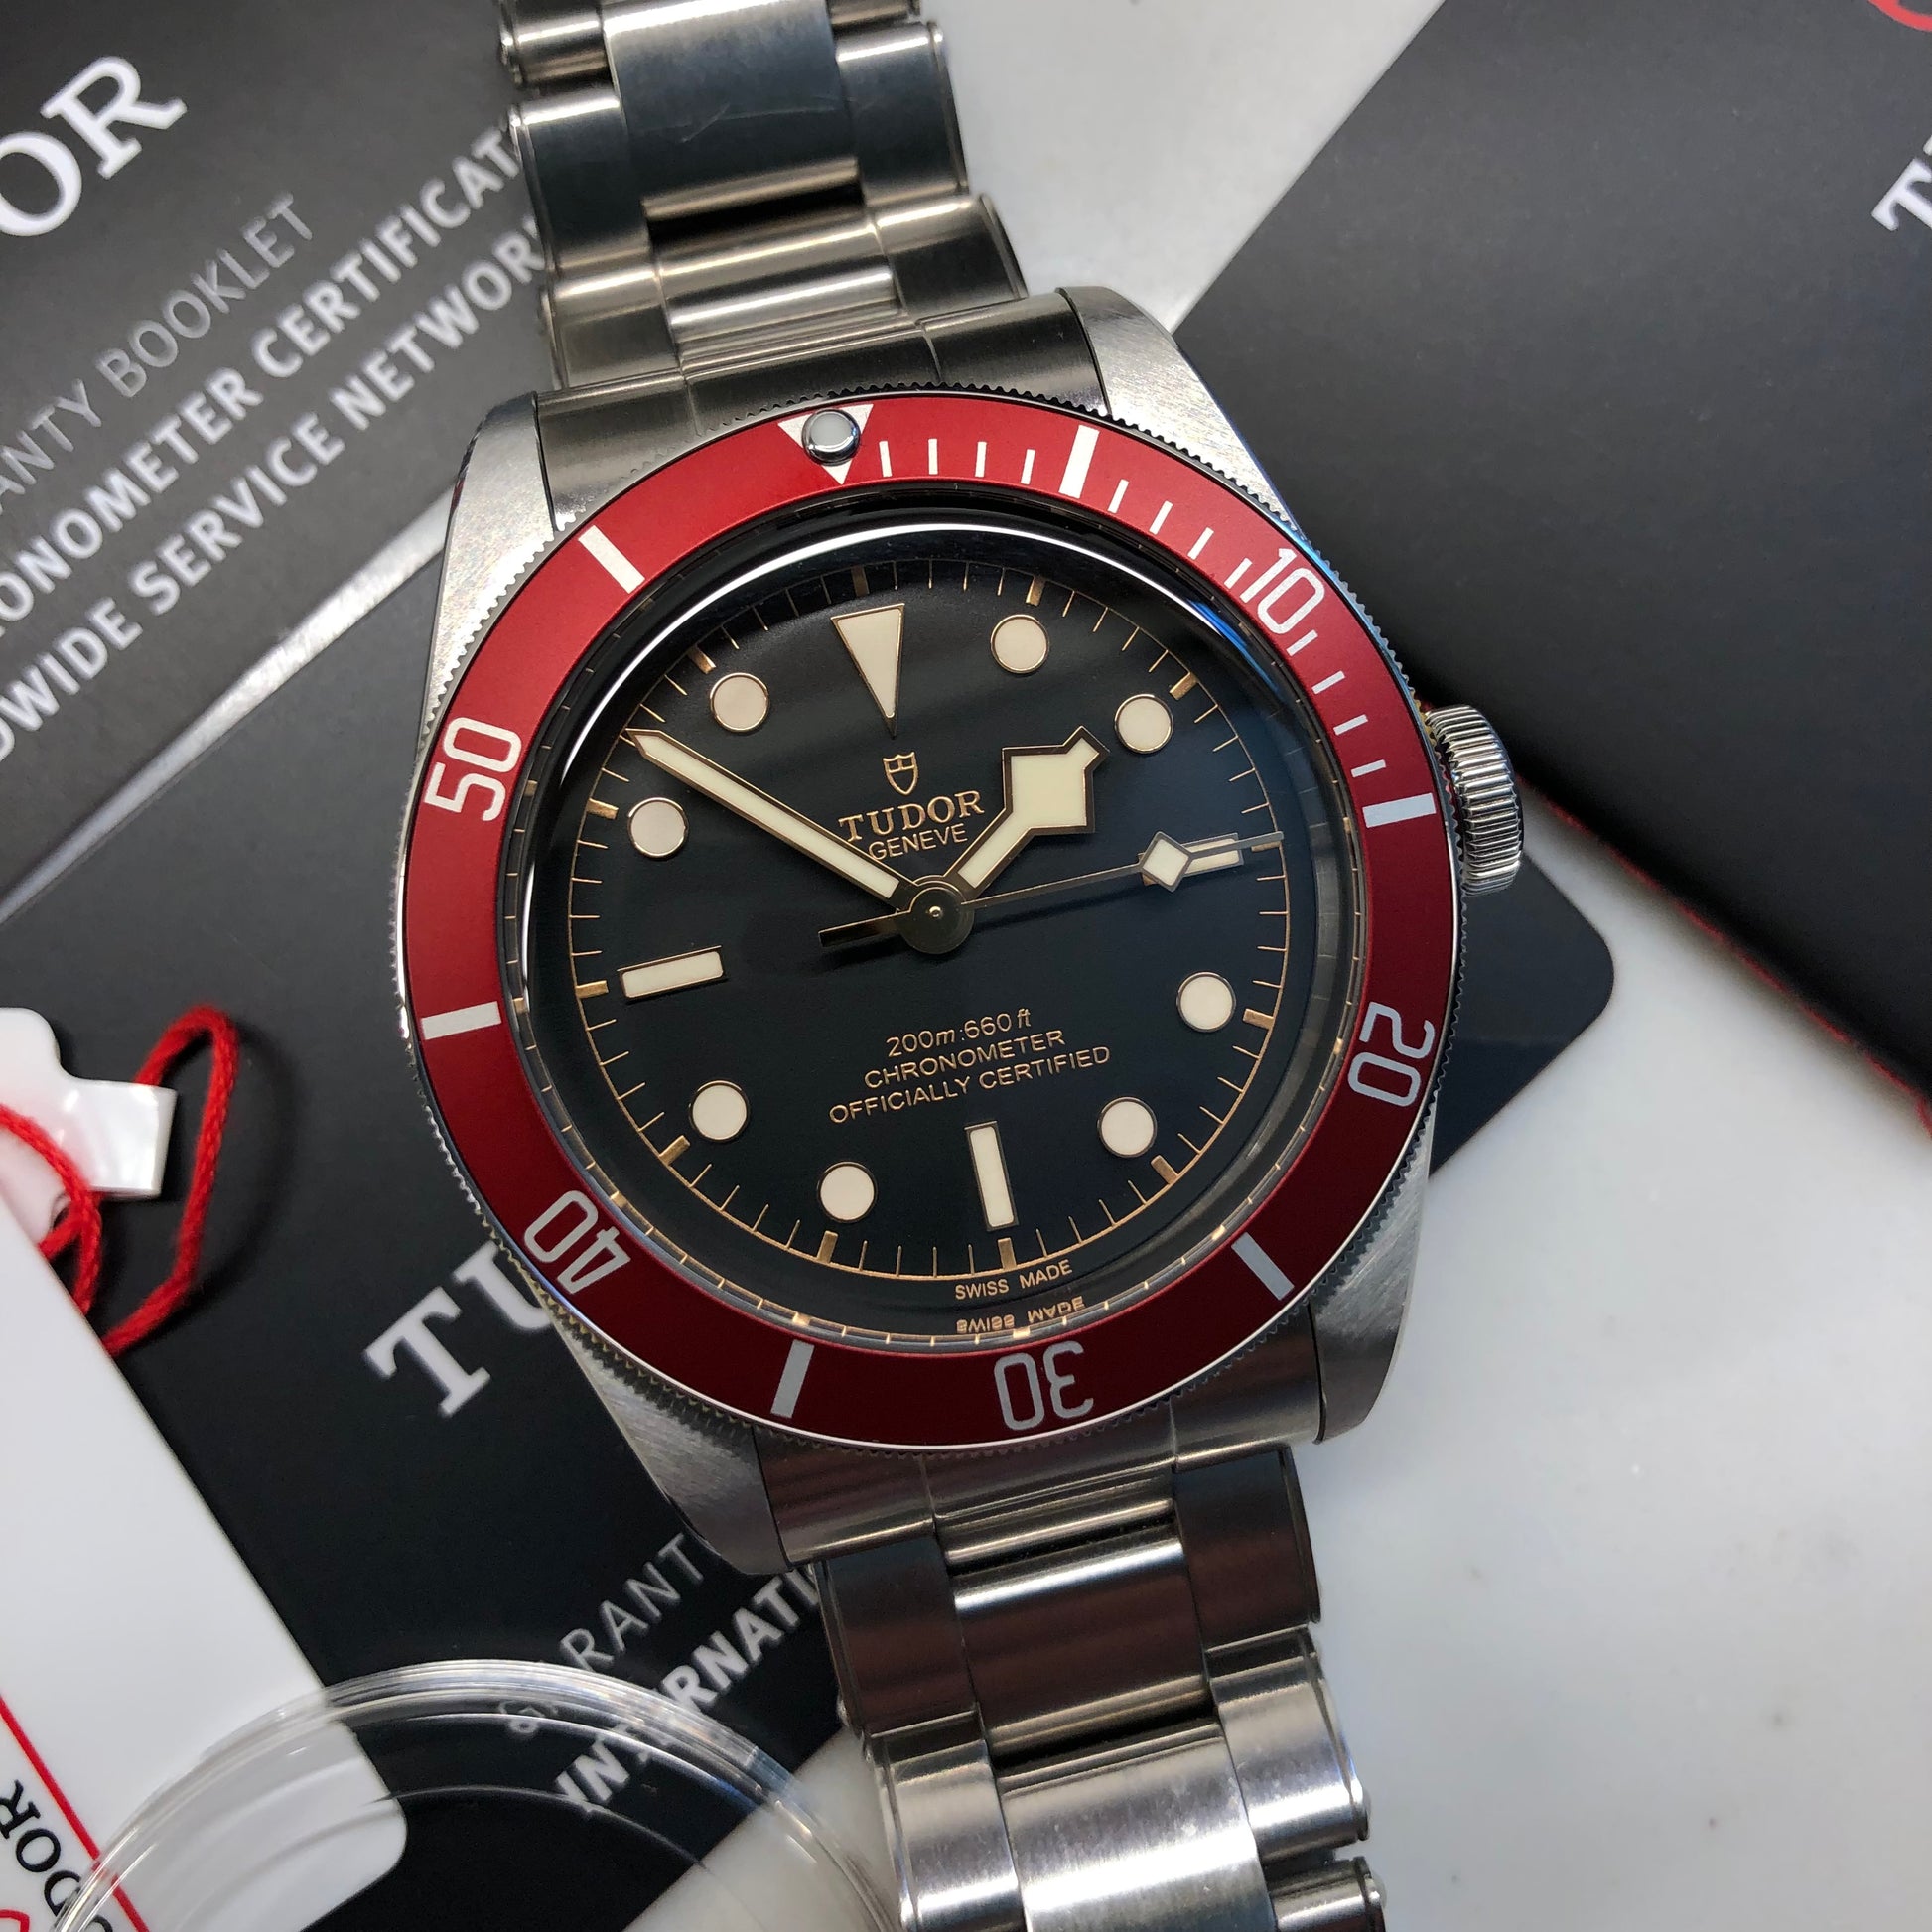 2022 Tudor Heritage Black Bay 79230R Red Bezel Automatic 41mm Wristwatch Box Papers - Hashtag Watch Company